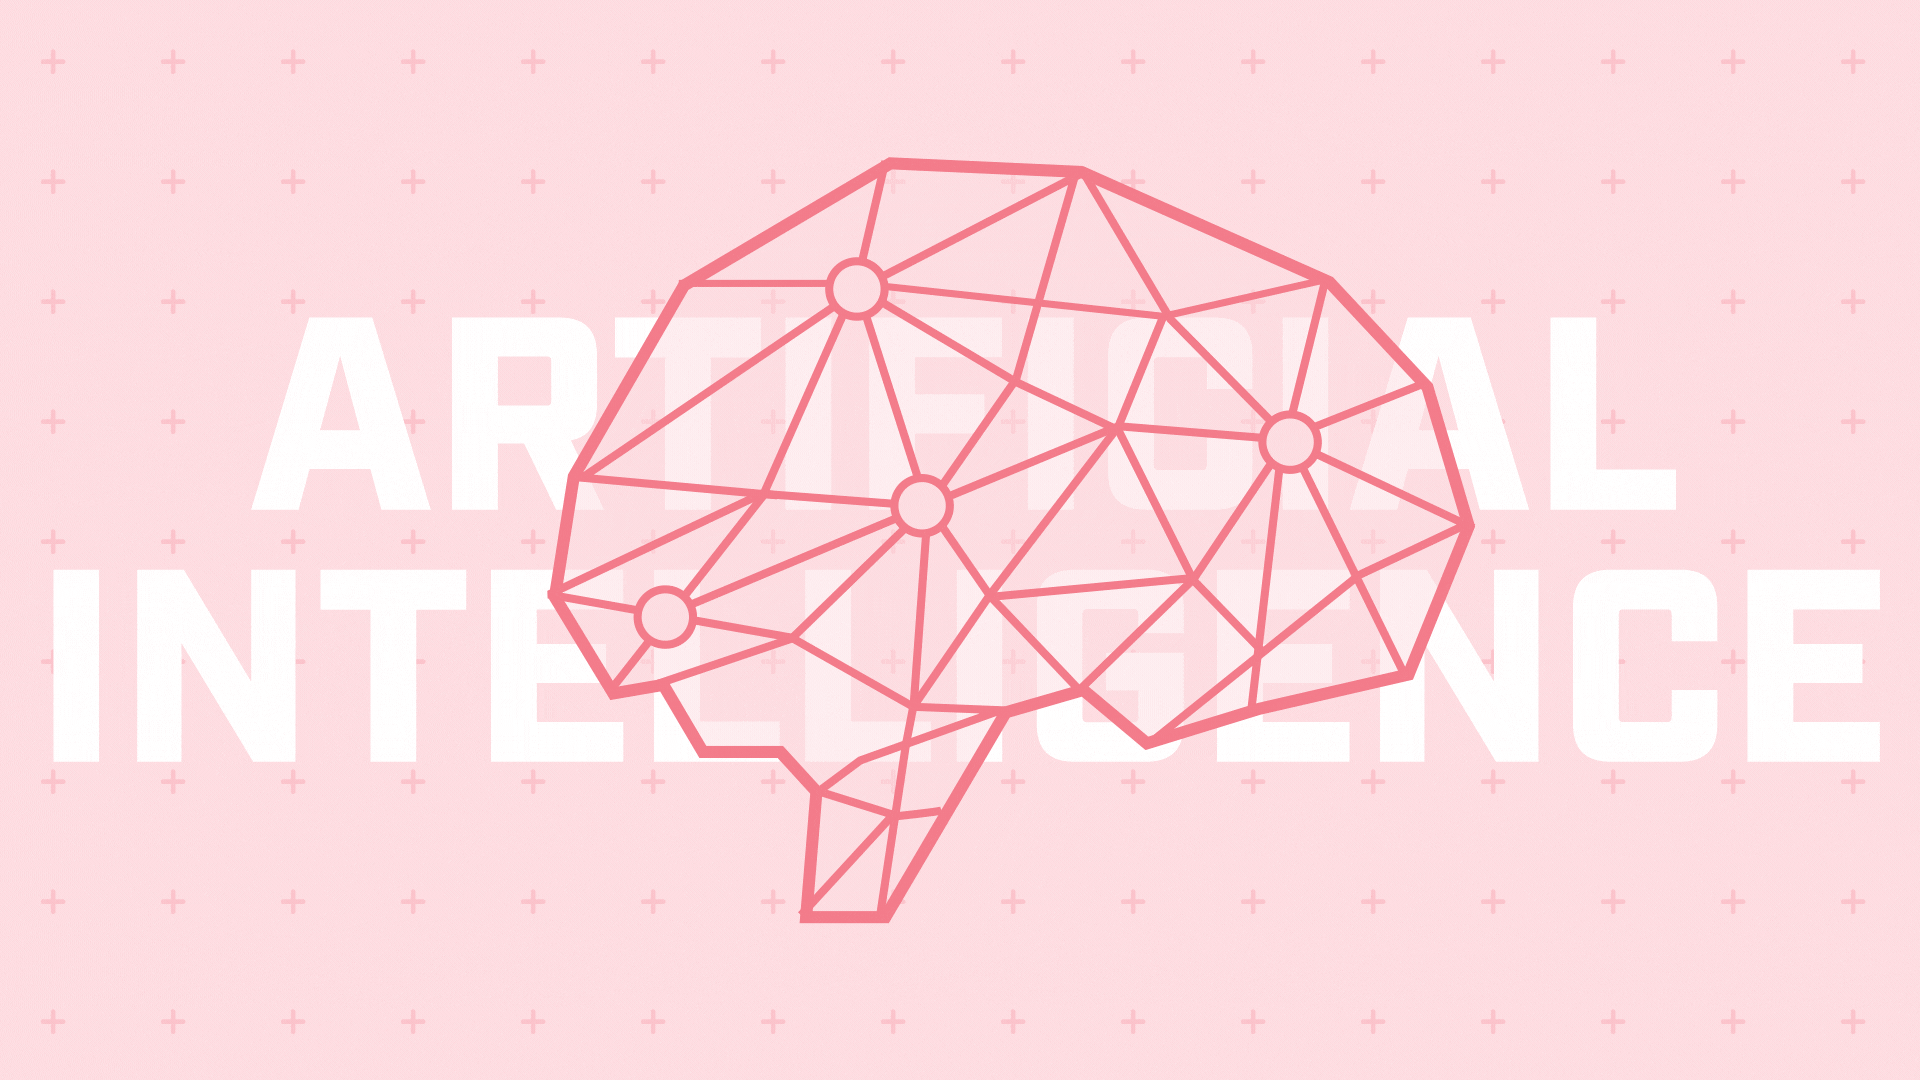 Brain icon made of lines and circles with the words Artificial Intelligence in the background